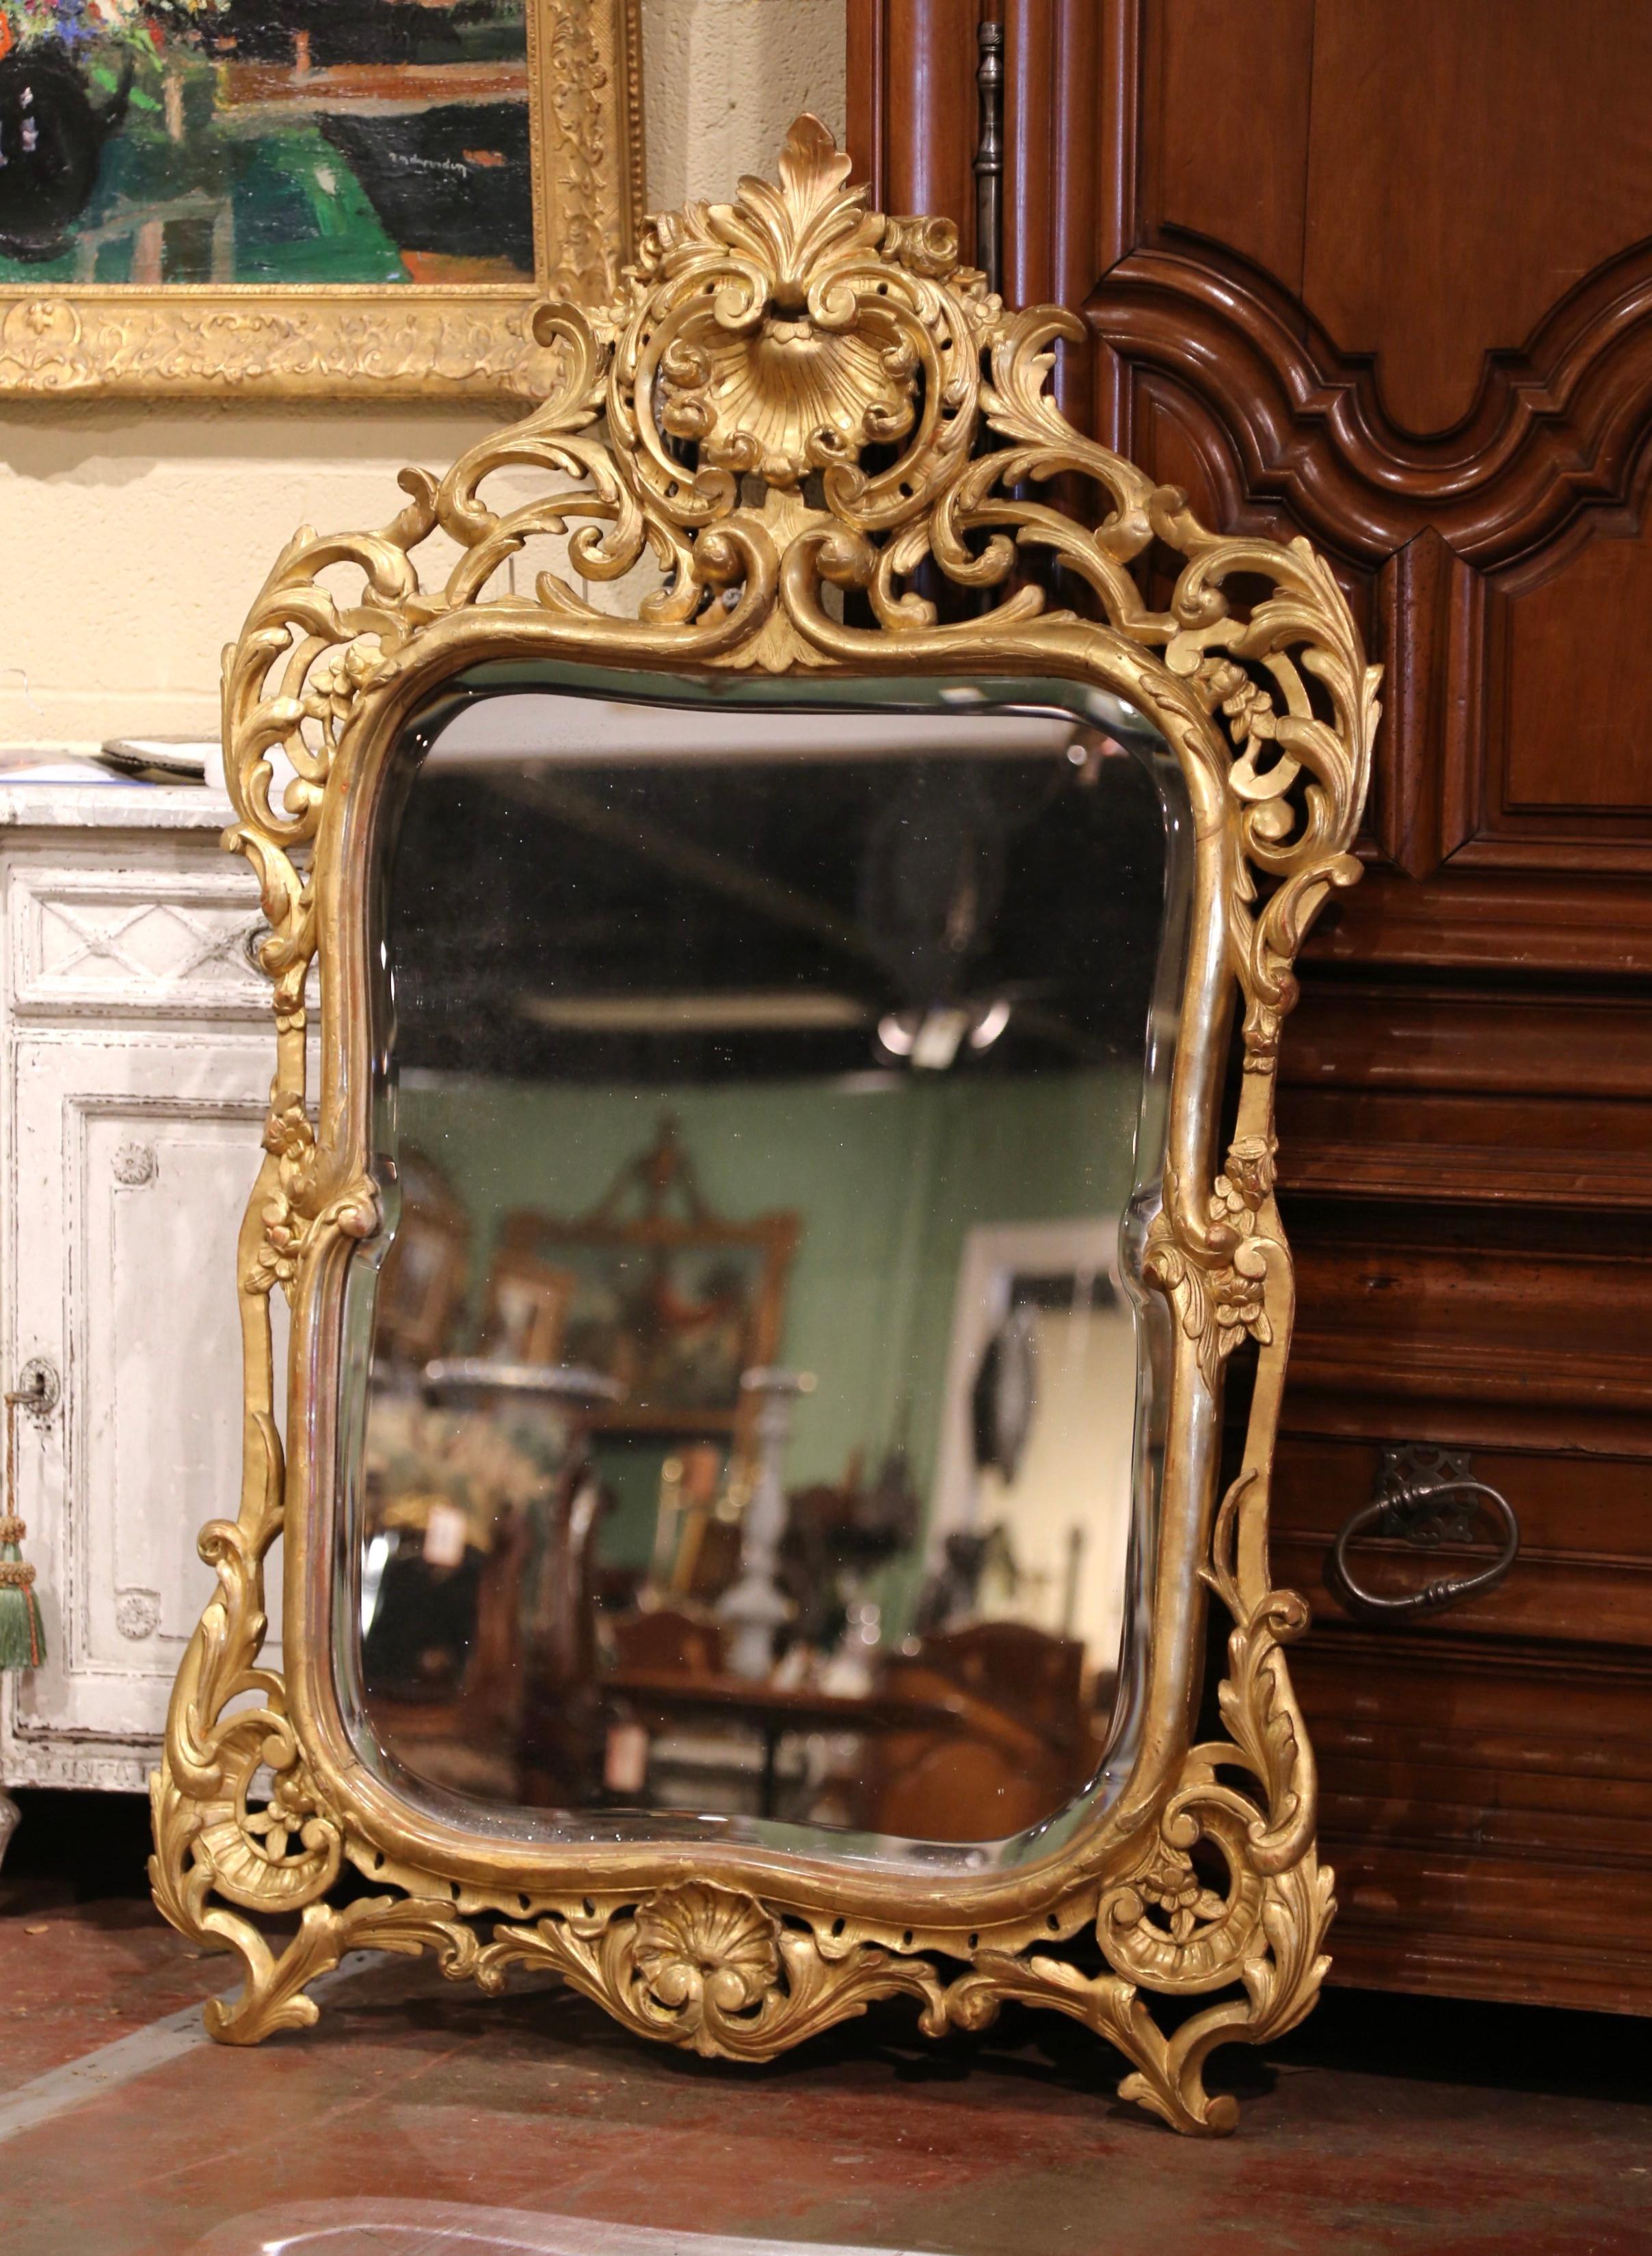 This elegant antique wall gilt mirror was crafted in Southern France, circa 1860. The rectangular mirror features a nicely carved pierced rocaille cartouche at the pediment with delicate scroll, leaf and shell motif. Both sides are embellished with